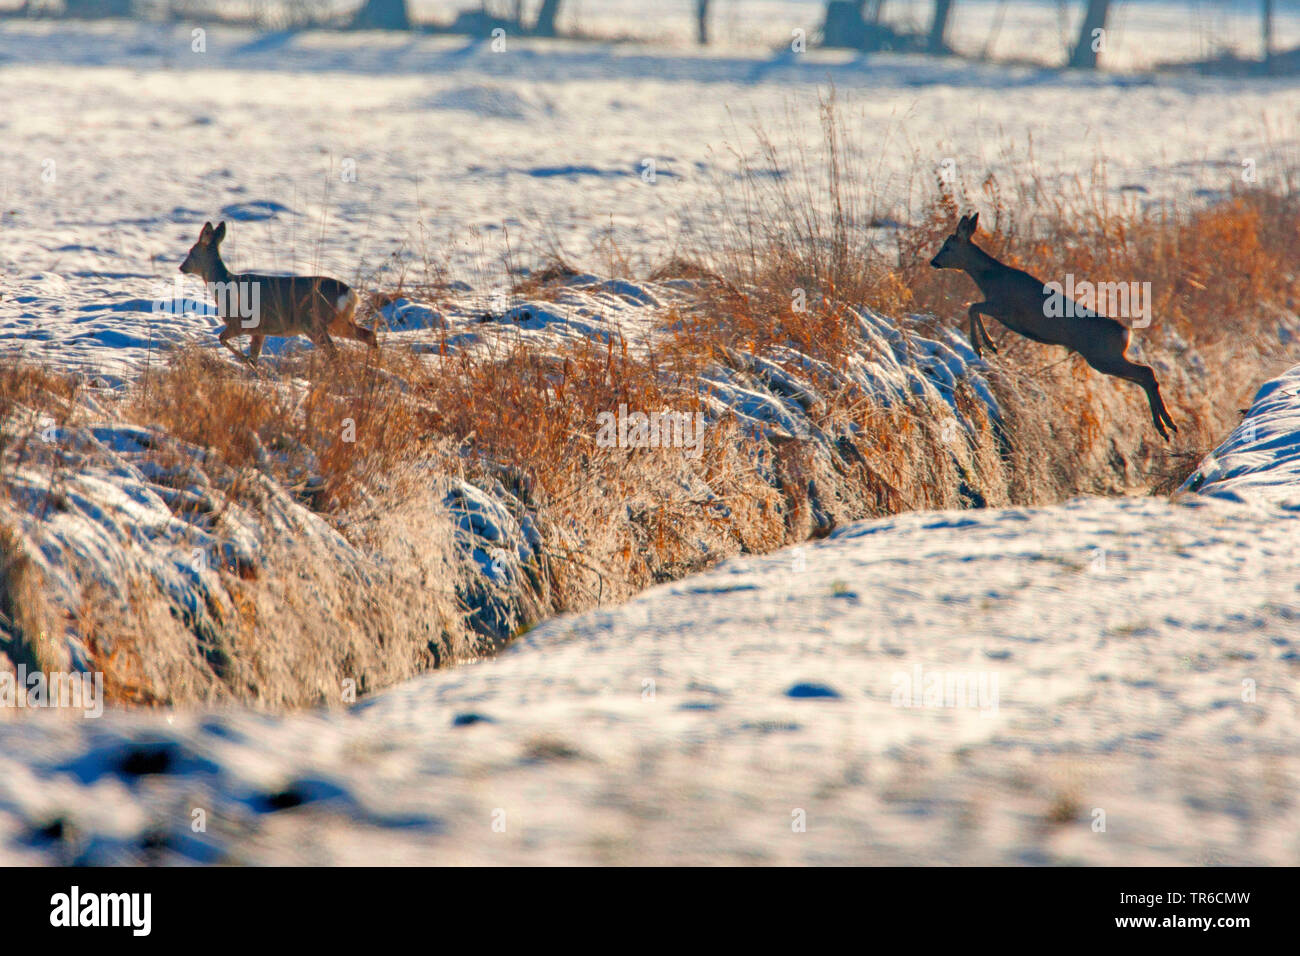 roe deer (Capreolus capreolus), jumping over a ditch in wintry arable land, side view, Germany, Bavaria Stock Photo